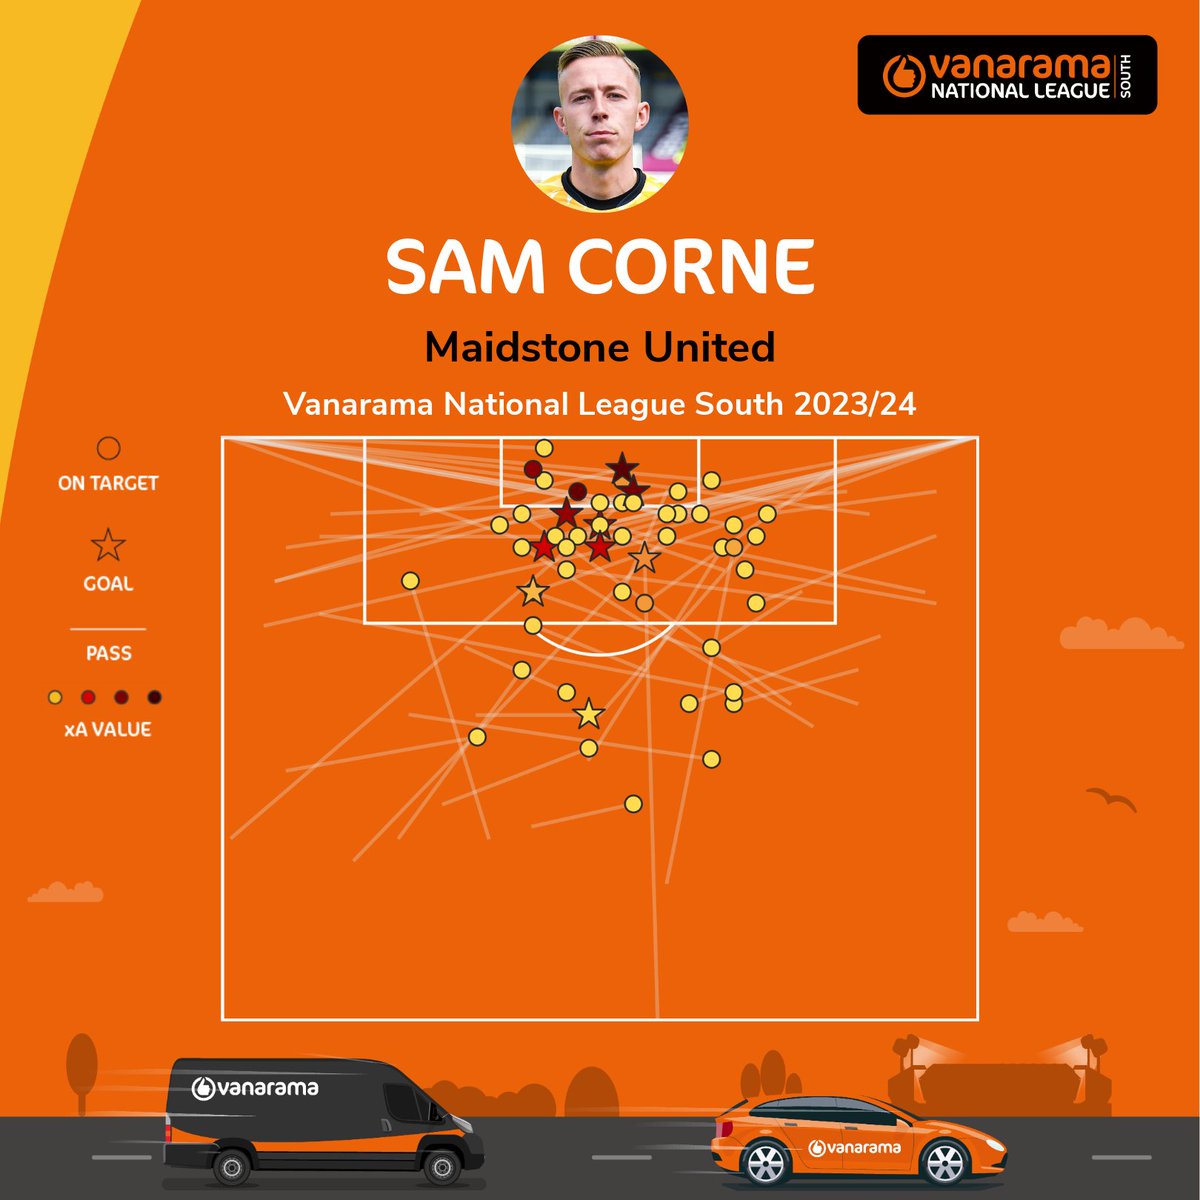 Expected goals and expected goals assisted maps for @samcorne96 🙌 #TheVanarama | @maidstoneunited